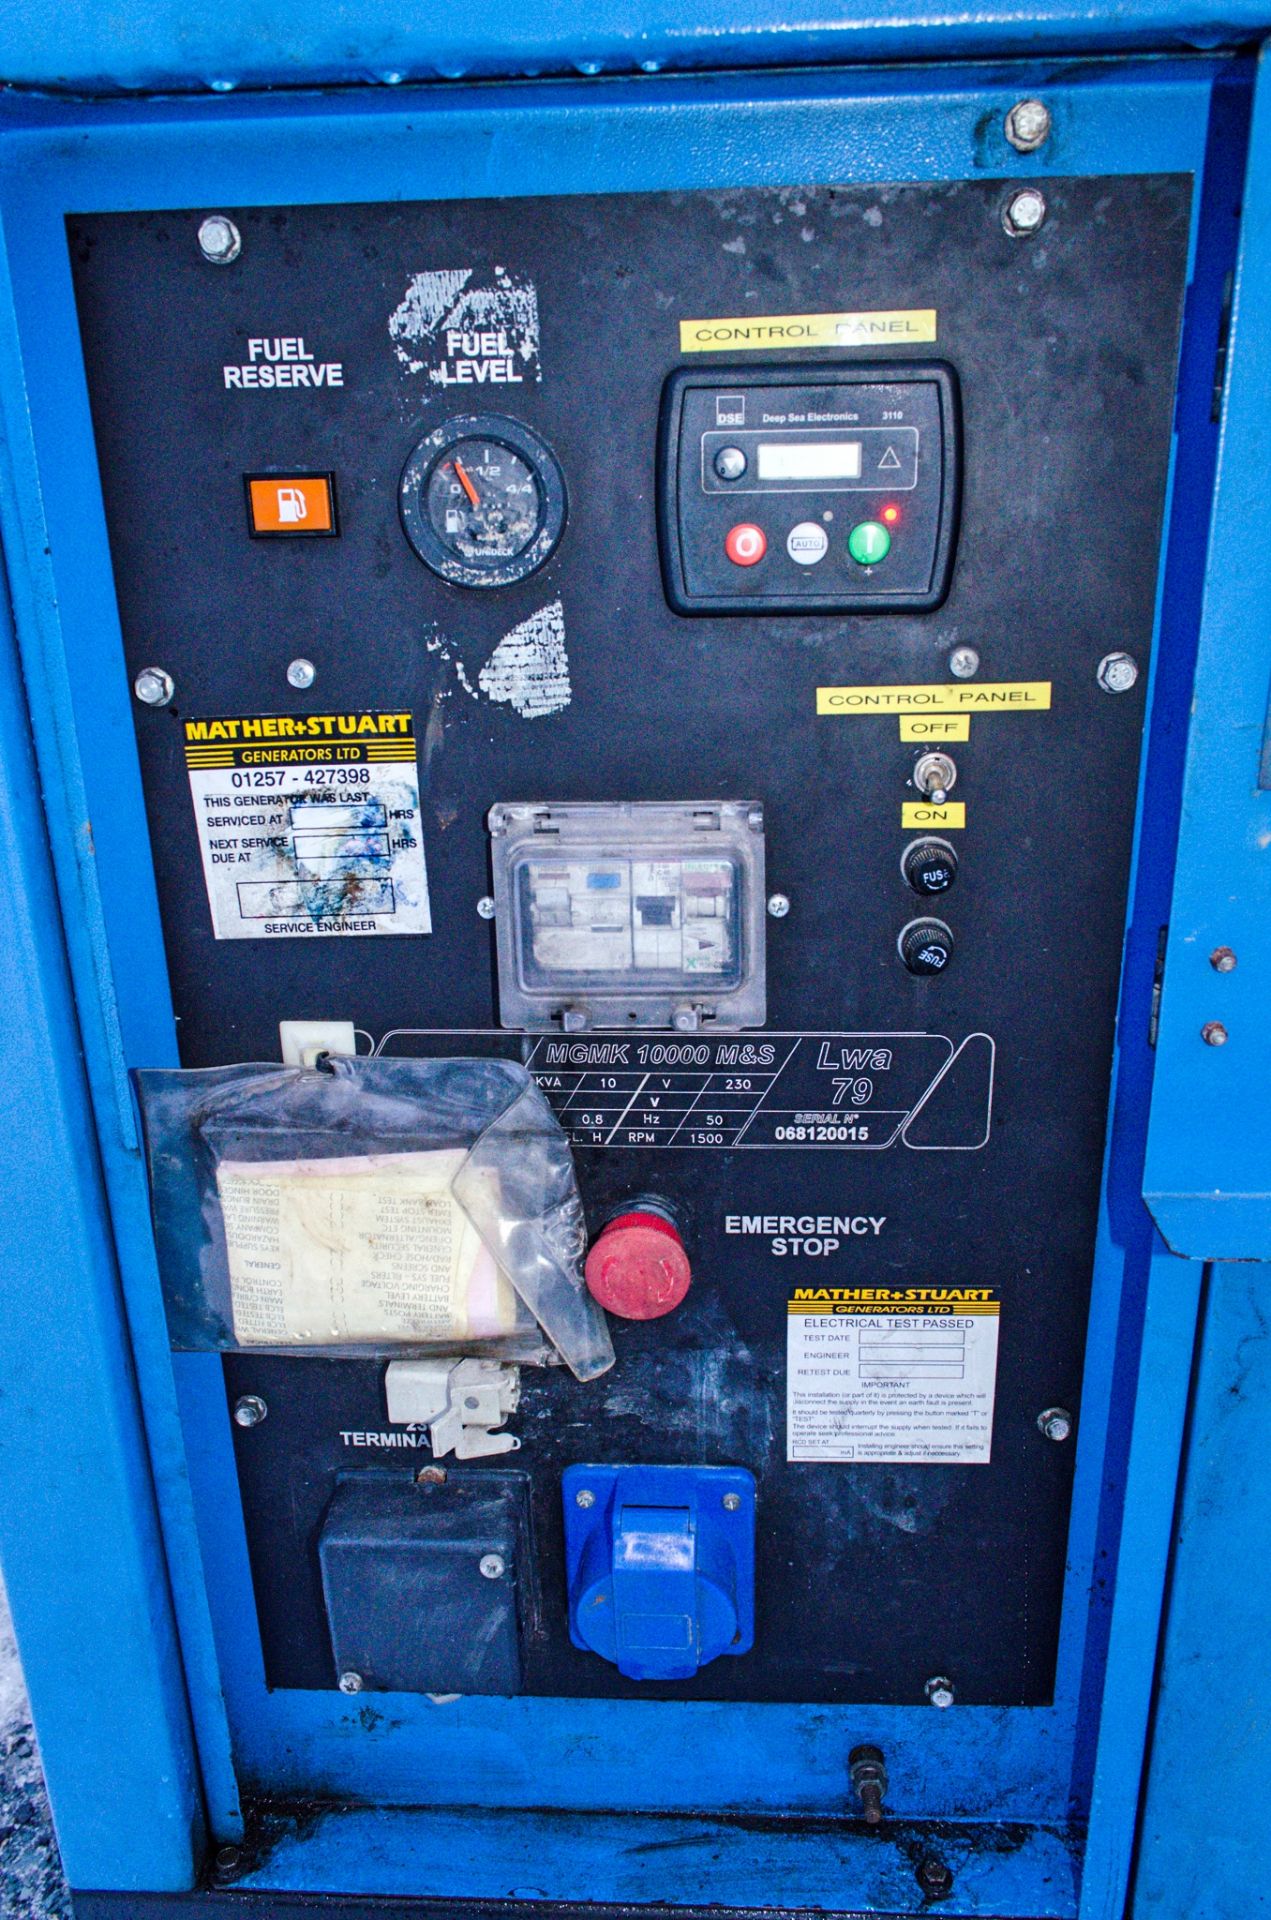 Genset MGMK 10000 10 kva static diesel driven generator Recorded Hours: 6149 MS2926 - Image 5 of 5